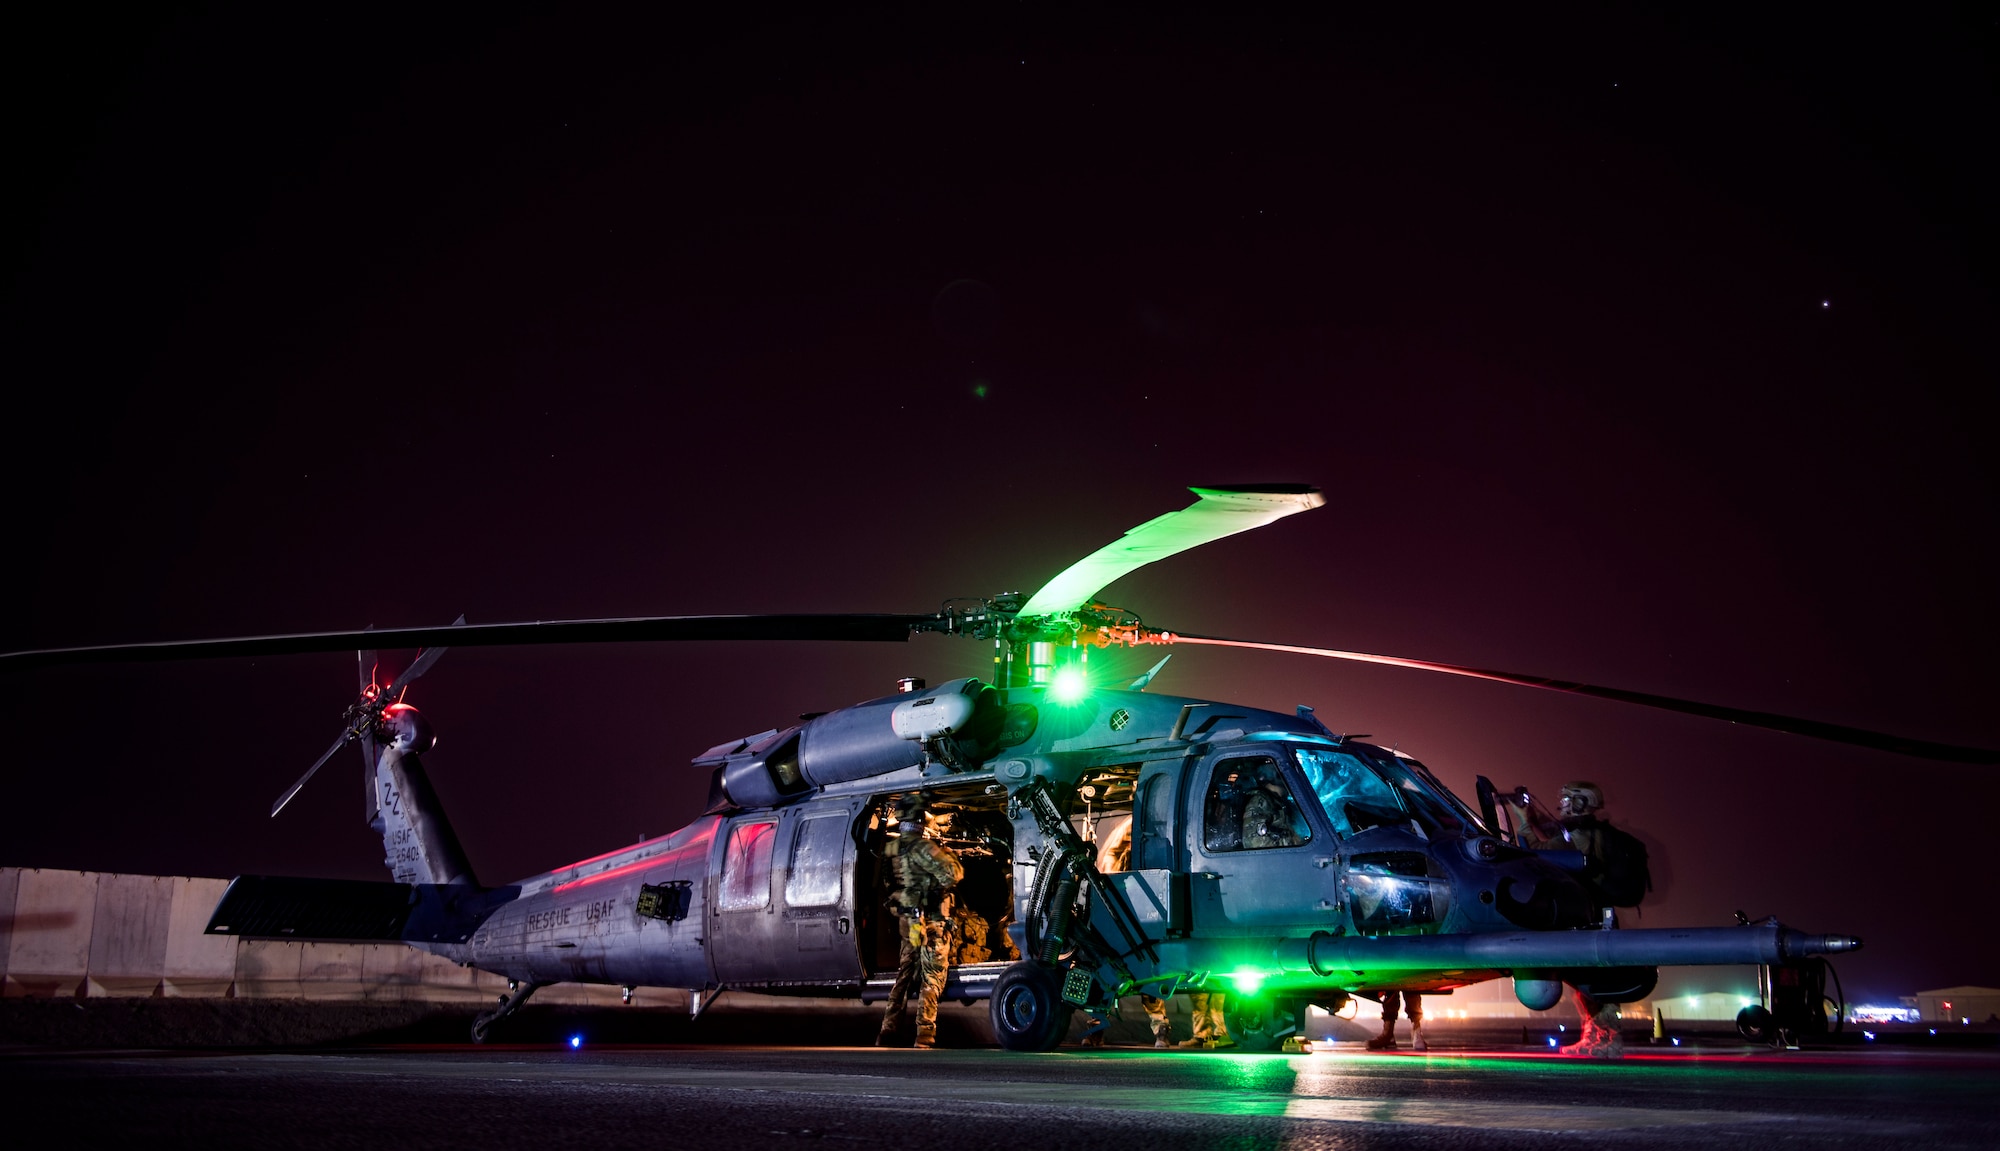 Aircrew members assigned to the 33rd and 308th Expeditionary Rescue Squadrons, prepare for a training mission with the HH-60G Pave Hawk at Kandahar Airfield, Afghanistan, in support of Operation Freedom’s Sentinel and the NATO Resolute Support mission, Mar. 13, 2018.